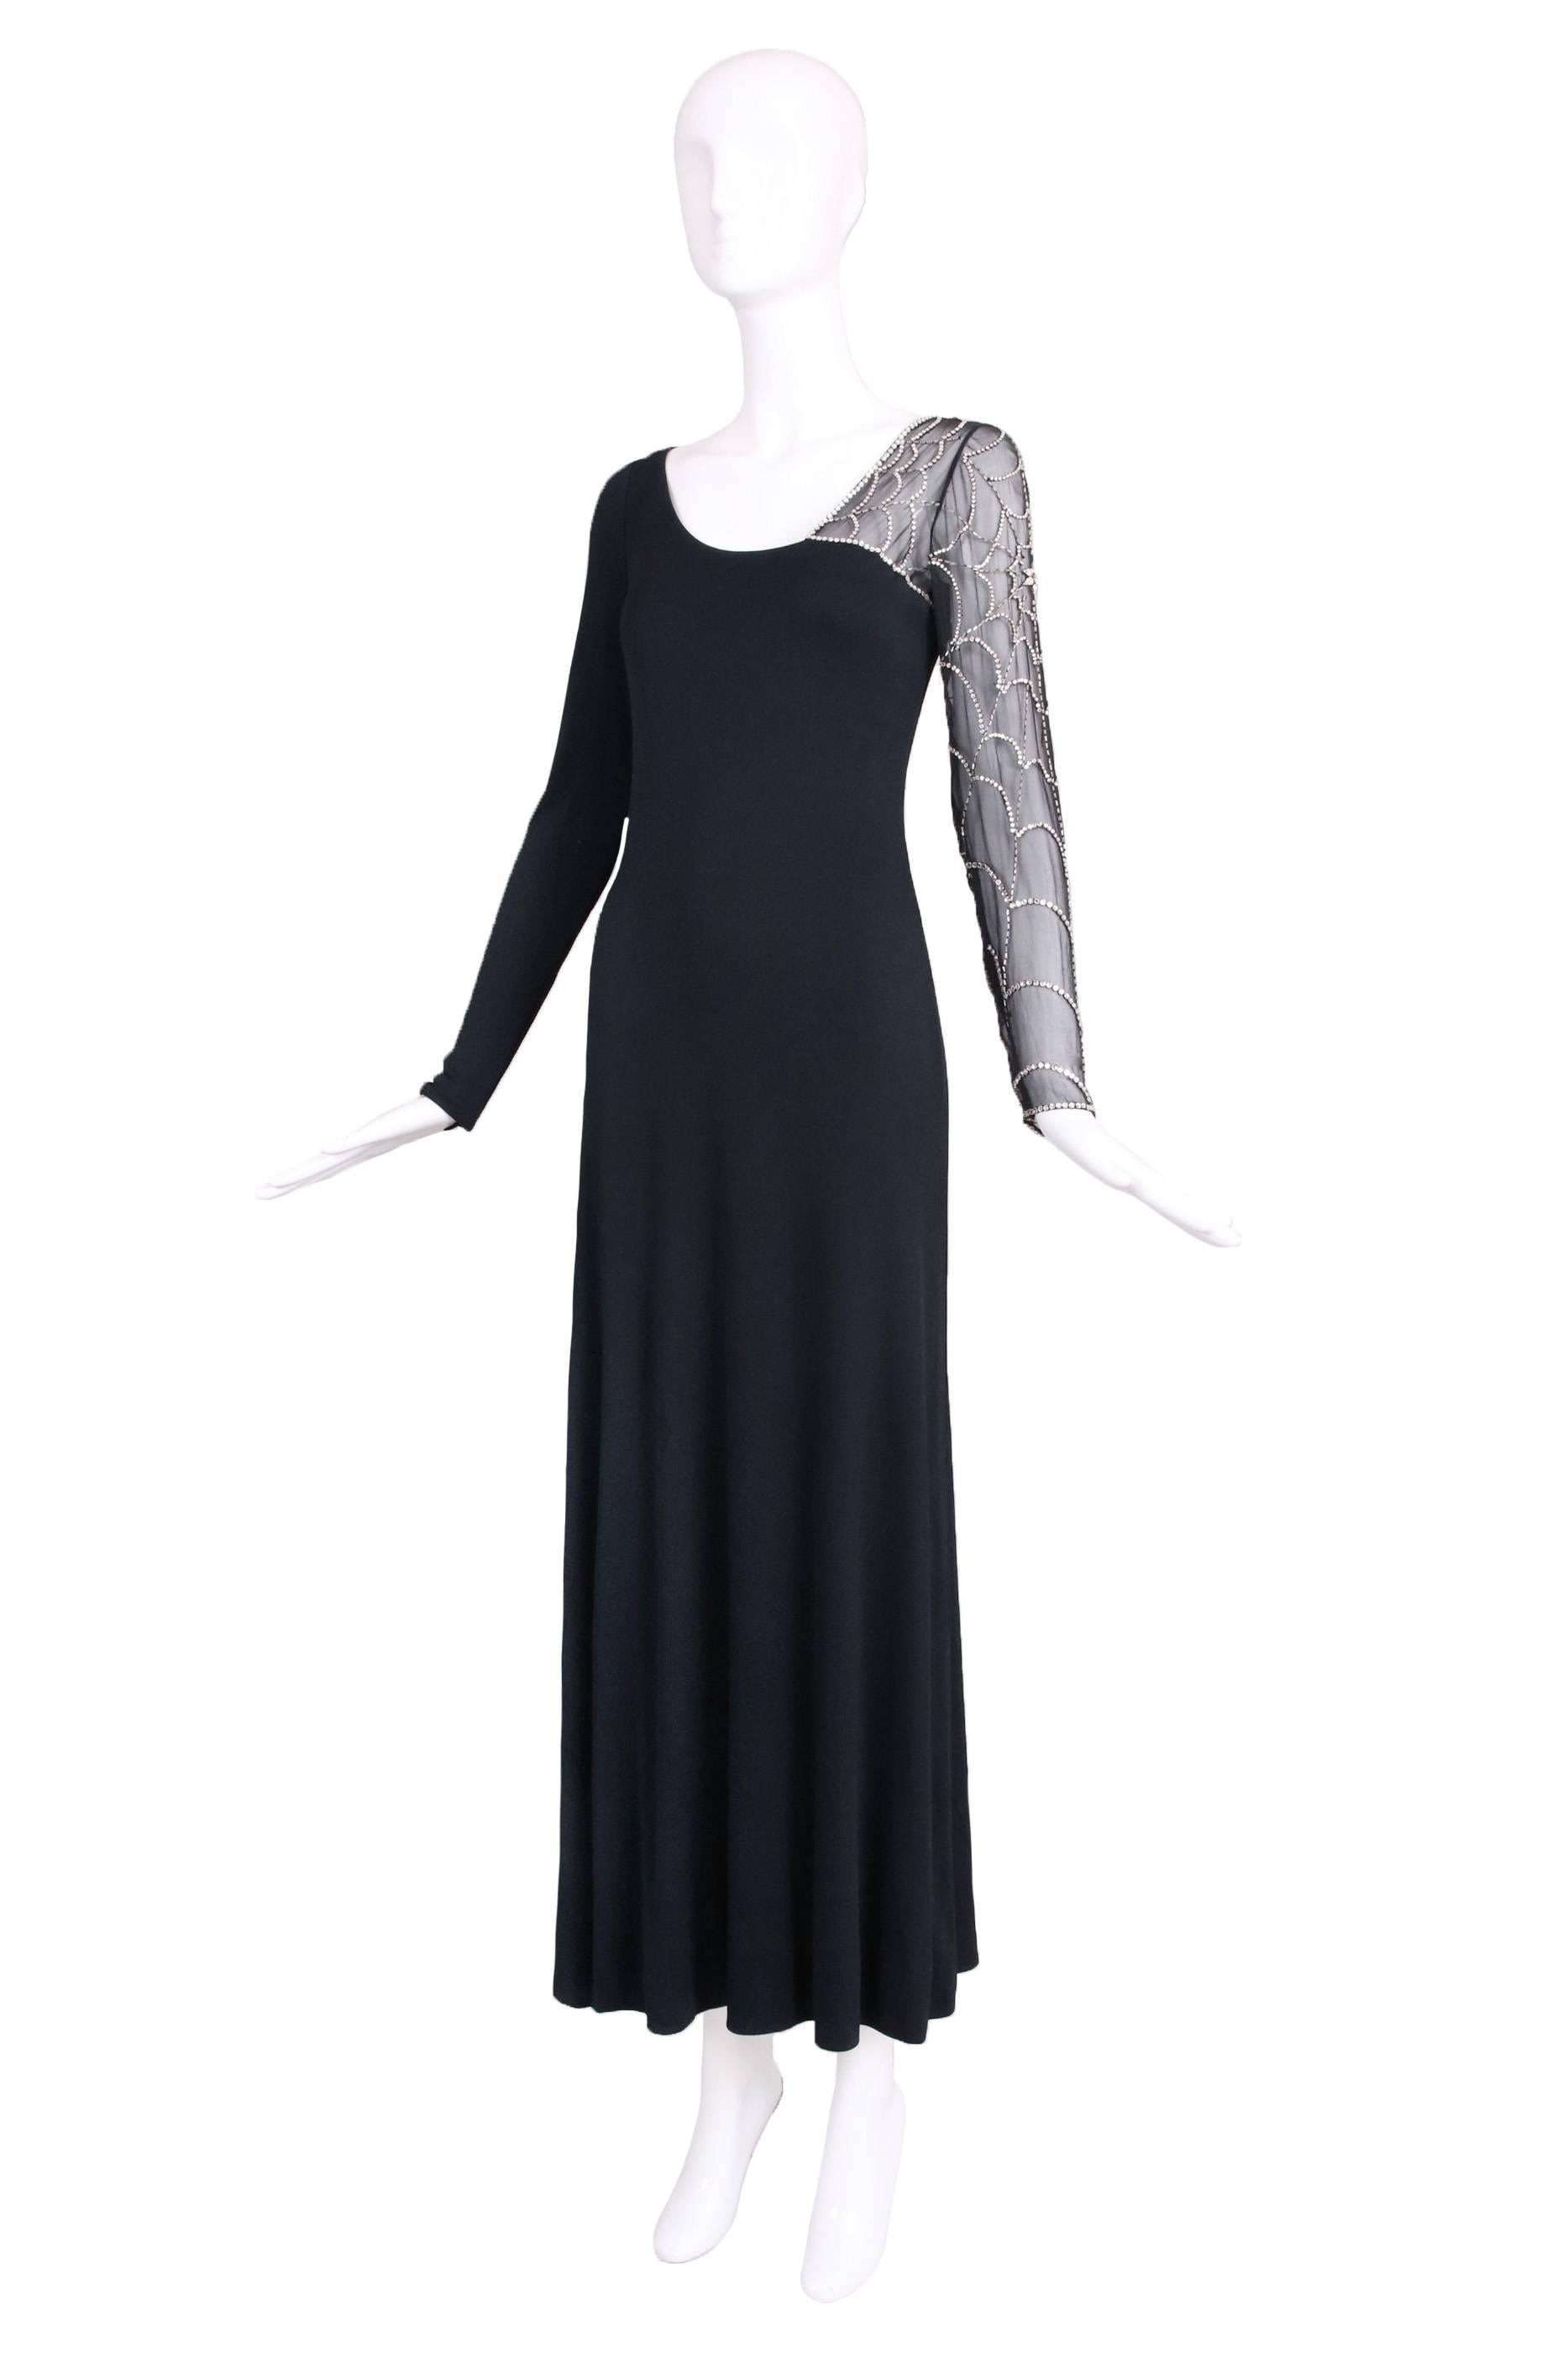 Mollie Parnis black double ply silk jersey evening gown with one transparent chiffon arm beaded and sequined in a spider web design. In excellent condition. No size tag, please see measurements.
MEASUREMENTS:
Bust - 34